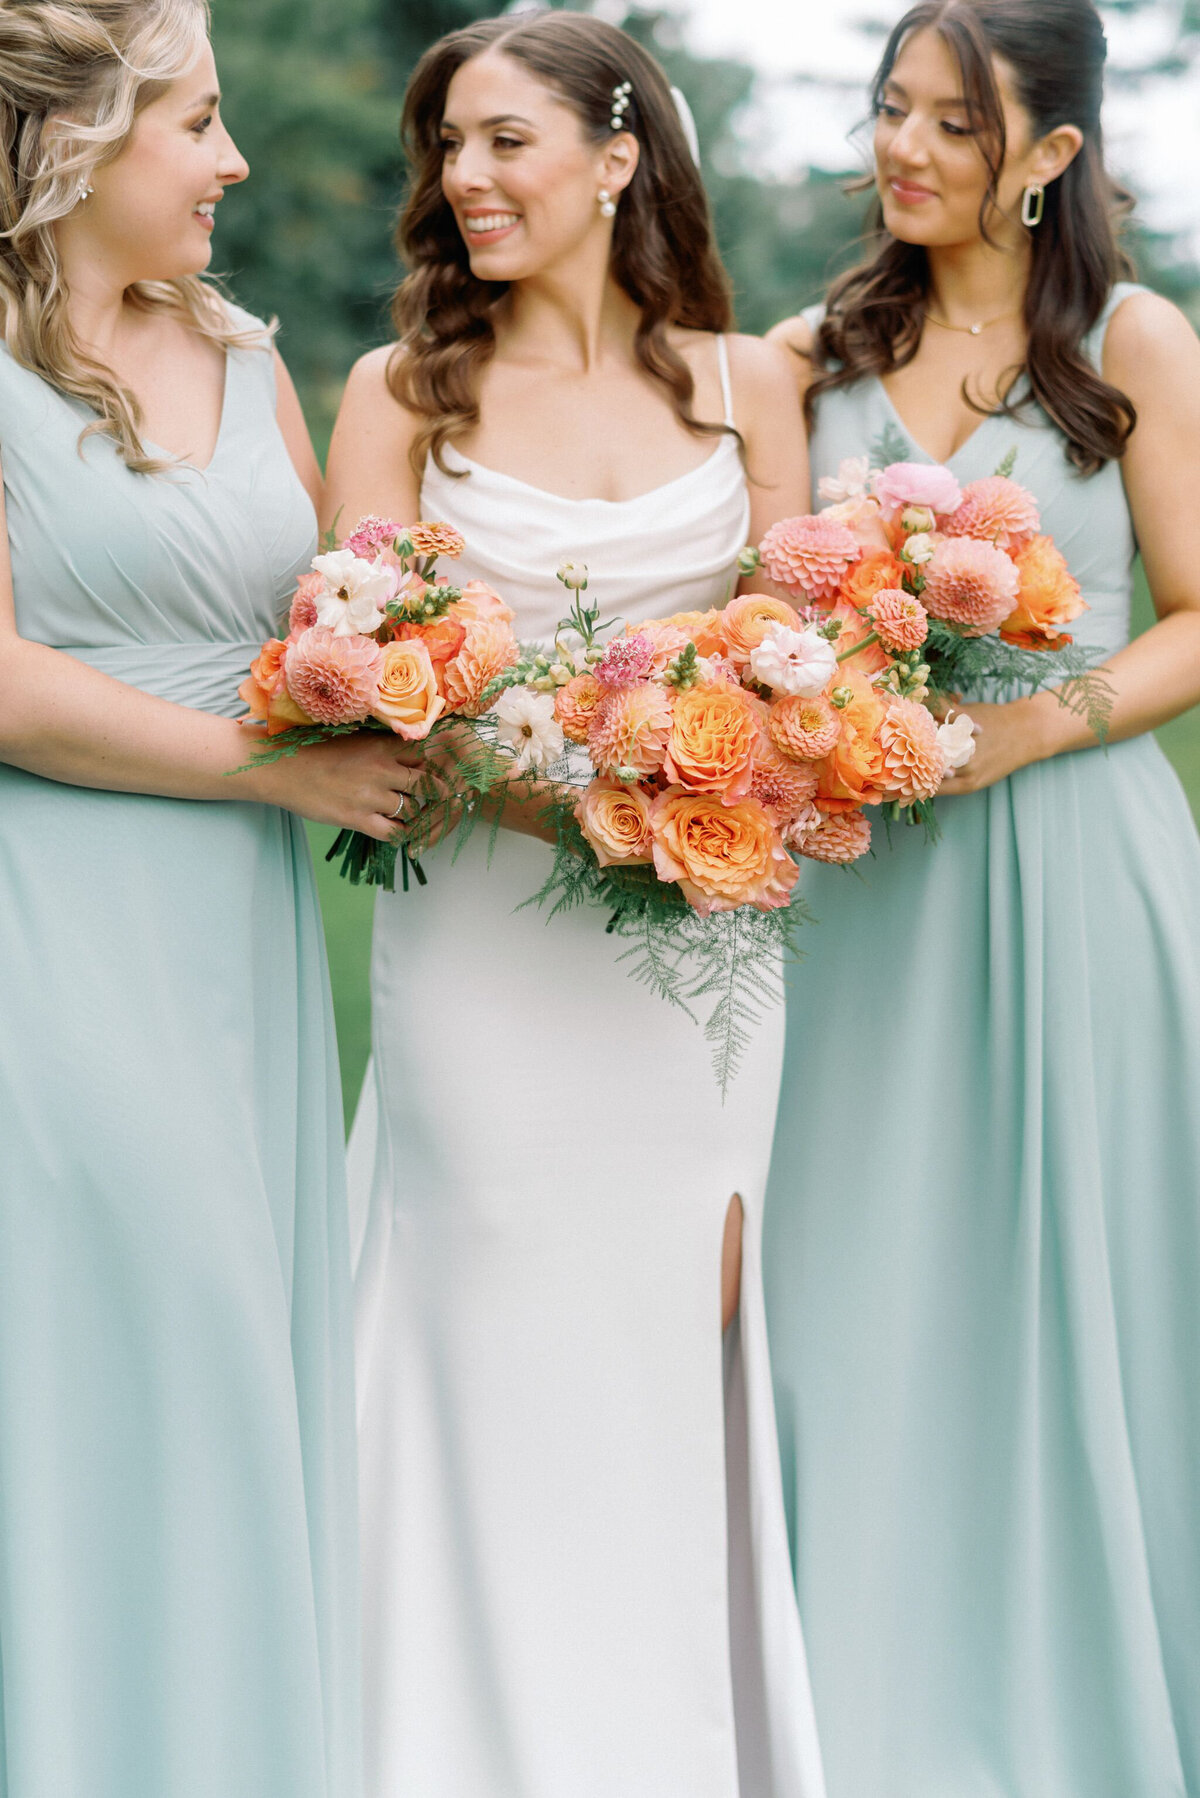 Colourful bridesmaids bouquets, captured by Kaity Body Photography, elegant film inspired wedding photographer in Calgary, Alberta. Featured on the Bronte Bride Vendor Guide